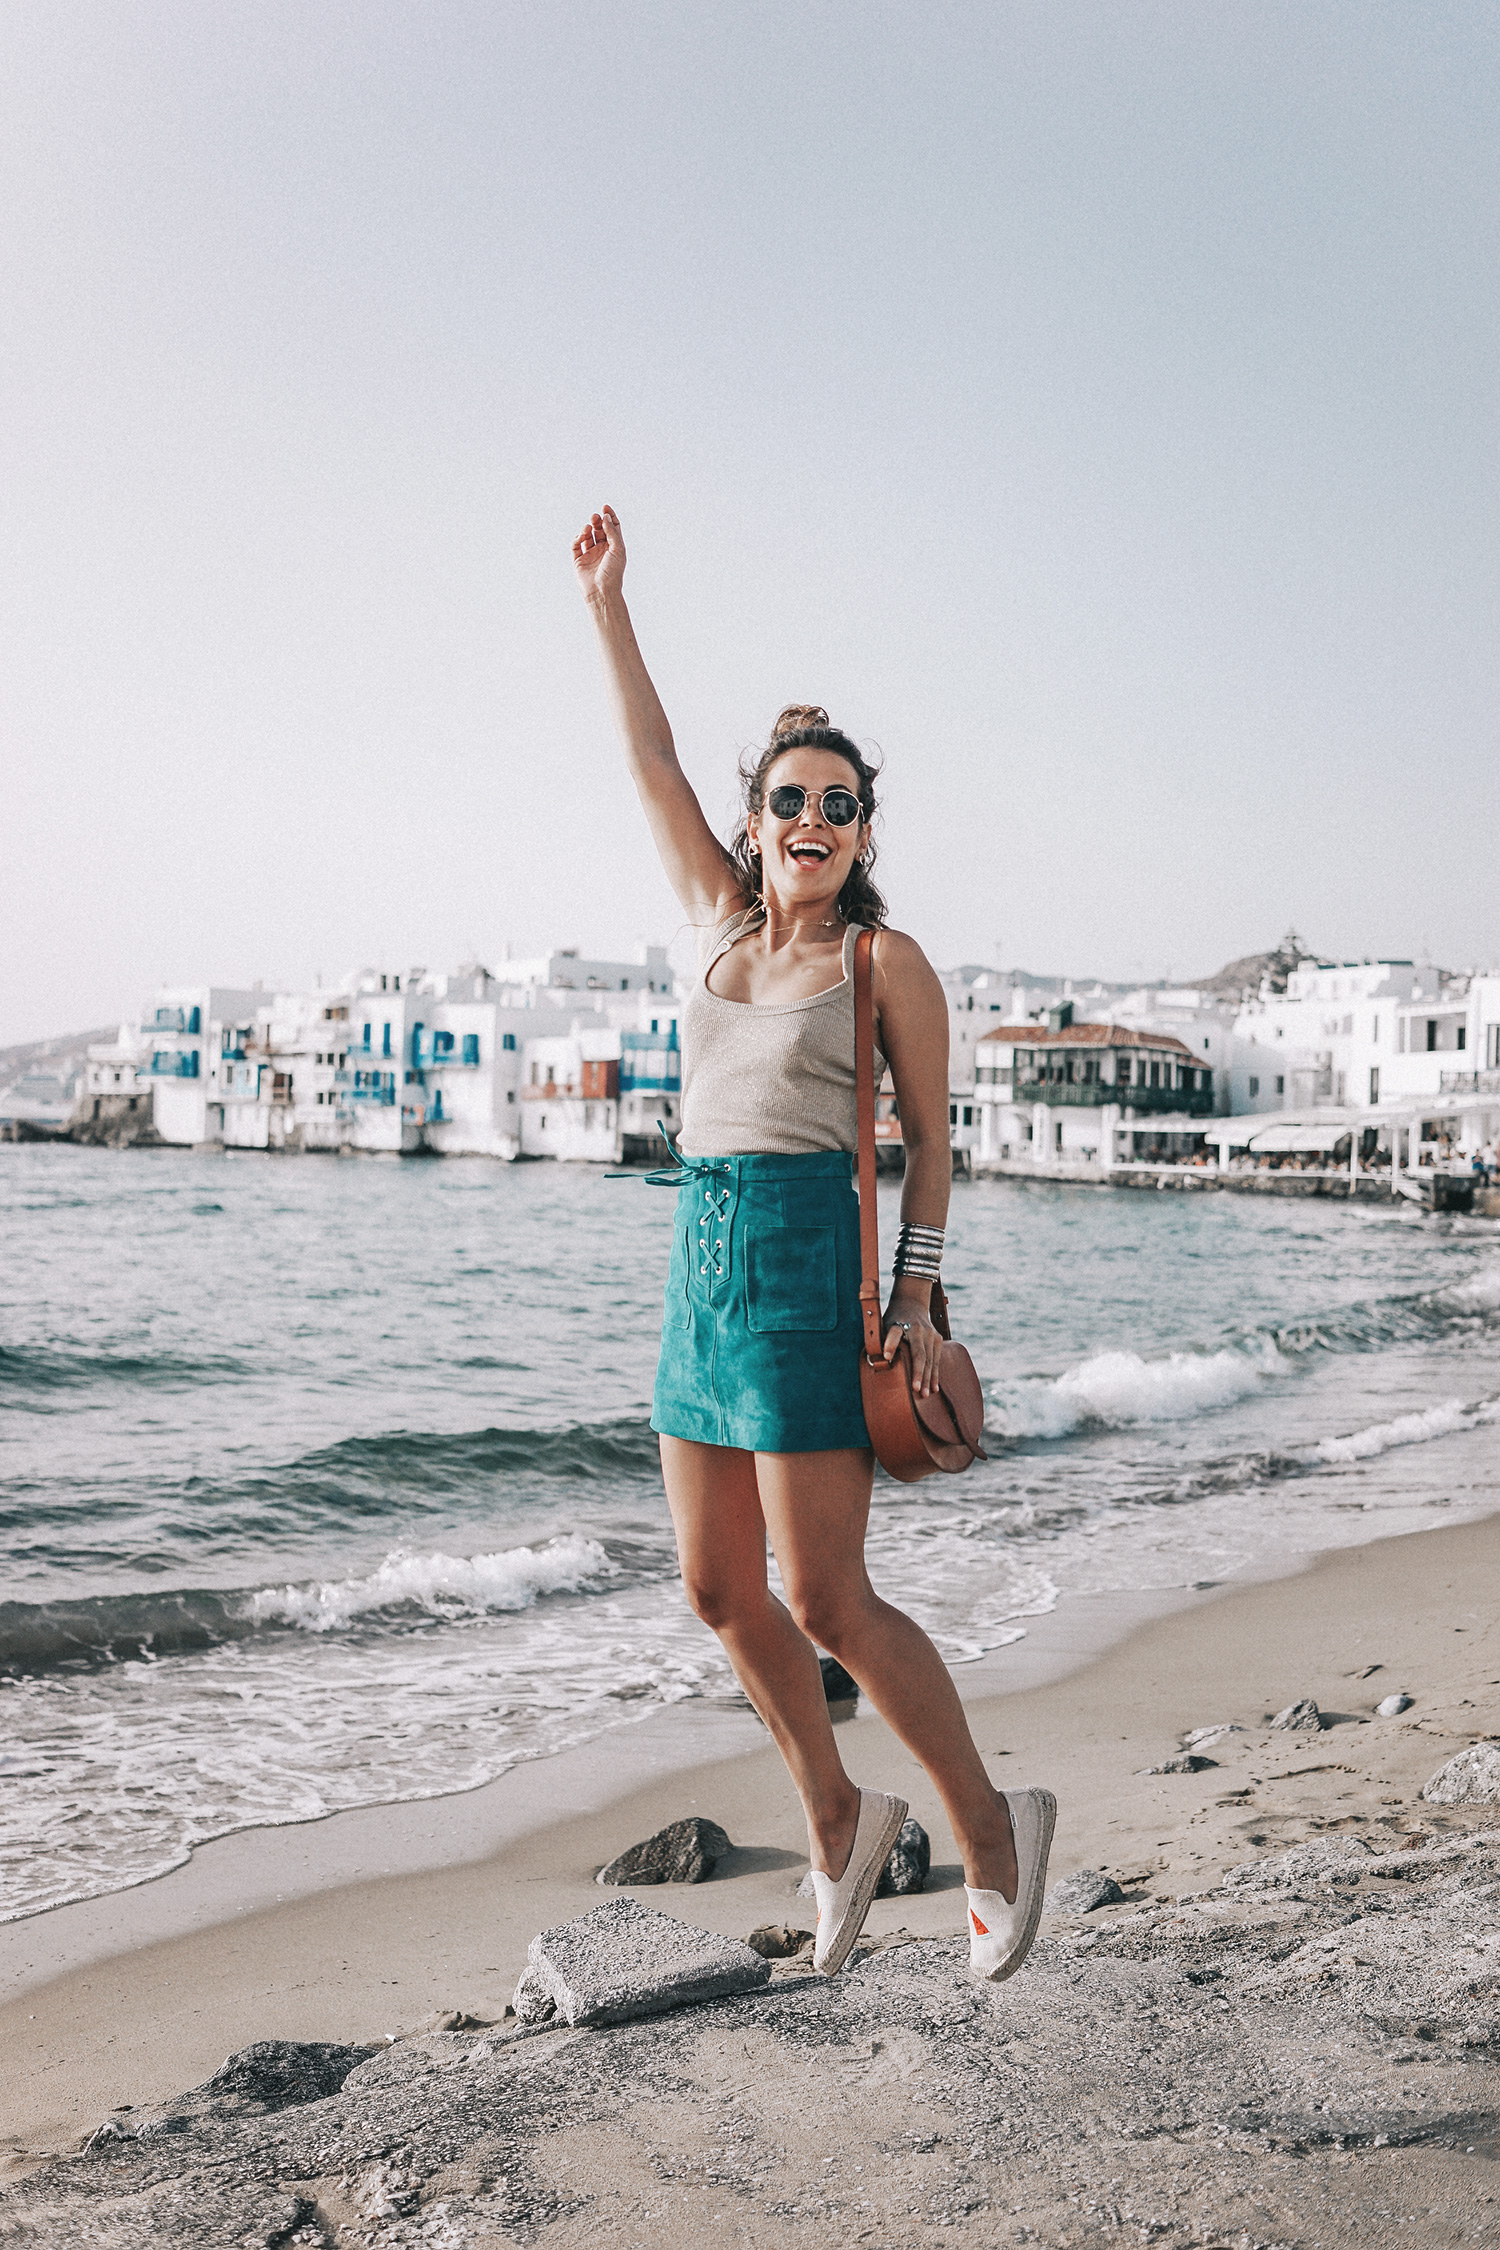 Gold_Top-Metallic_Trend-Suede_Skirt-Turquoise_Skirt-Soludos_Espadrilles-Soludos_Escapes-Mykonos-Greece-Collage_Vintage-Street_Style-122